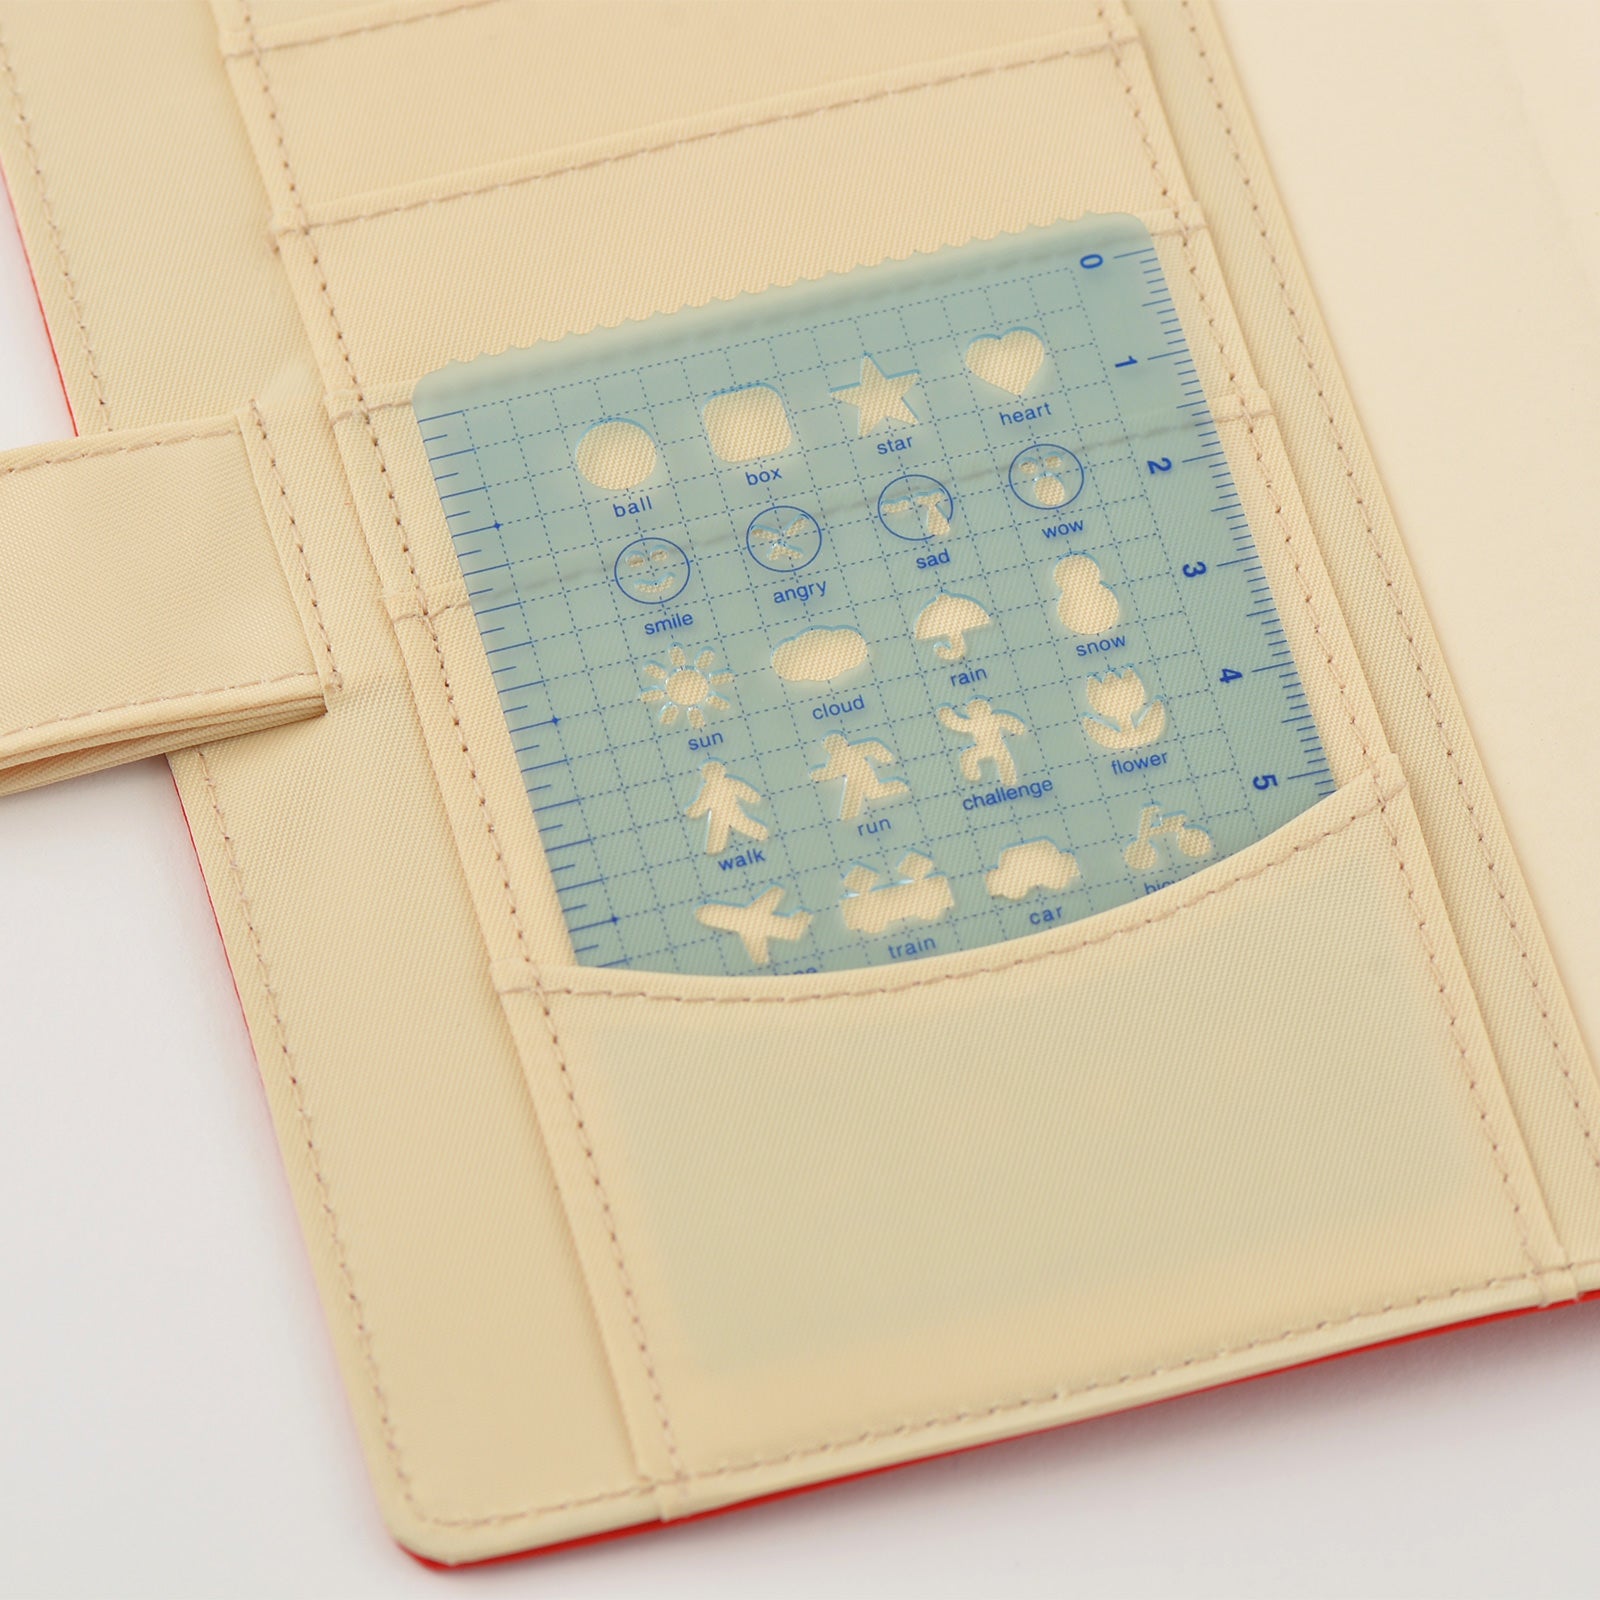 Hobonichi Stencil Travel Hobonichi stencils are designed to perfectly fit into planner cover pockets.  The Travel set includes an outline of Japan, symbols for hot springs and fireworks, and other icons for travel and vacation.